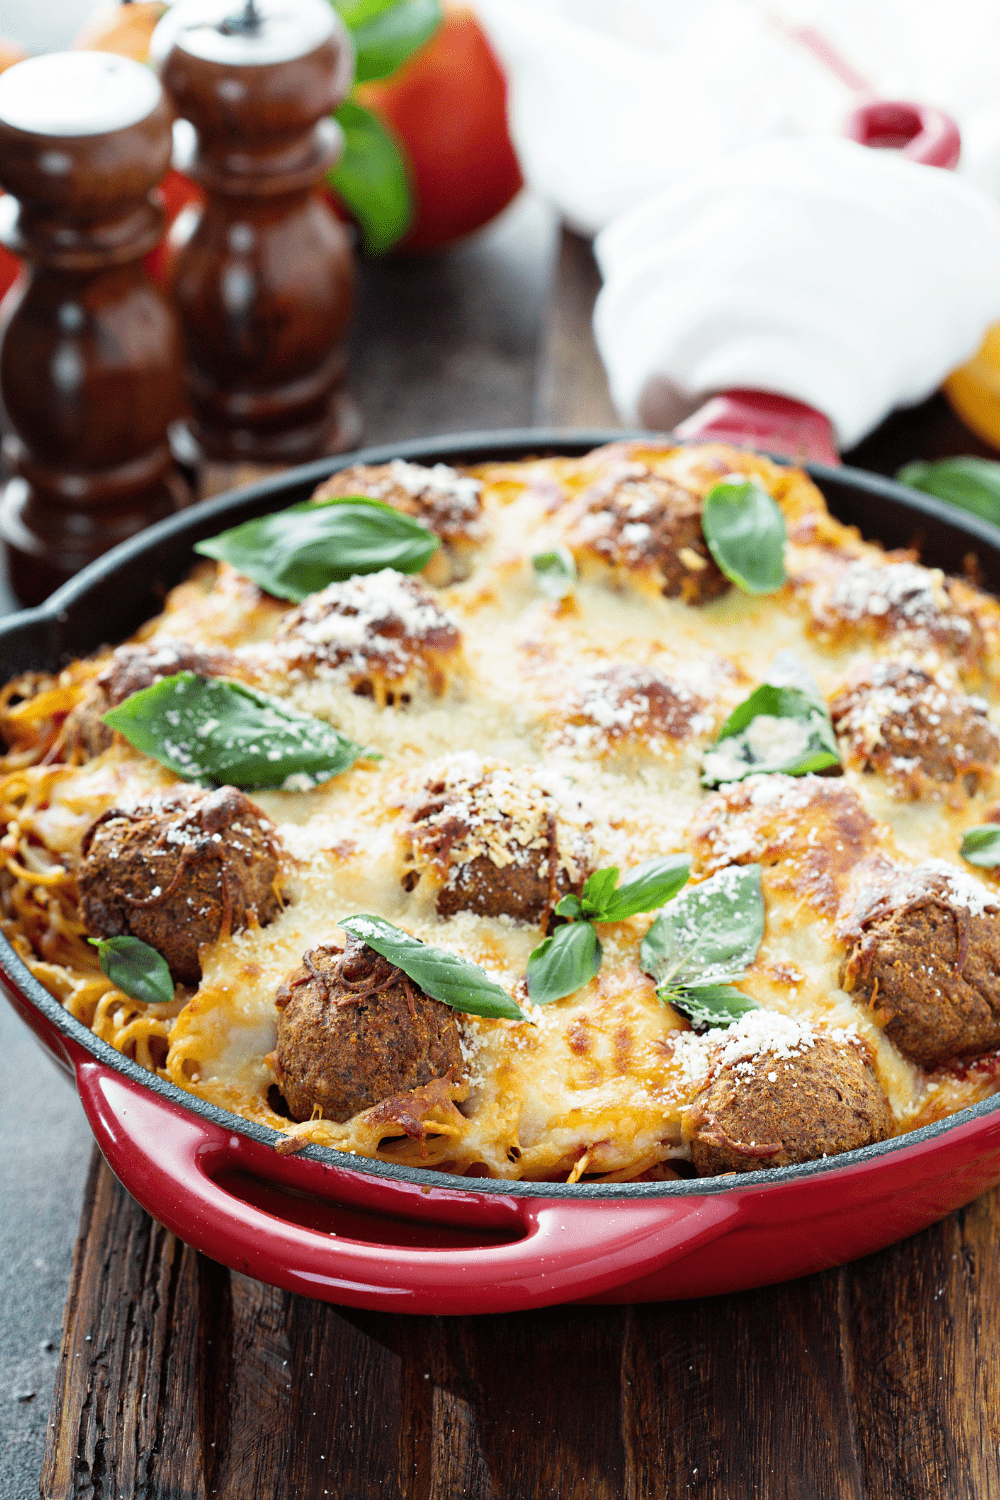 10 Leftover Meatball Recipes You’ll Love – Insanely Good